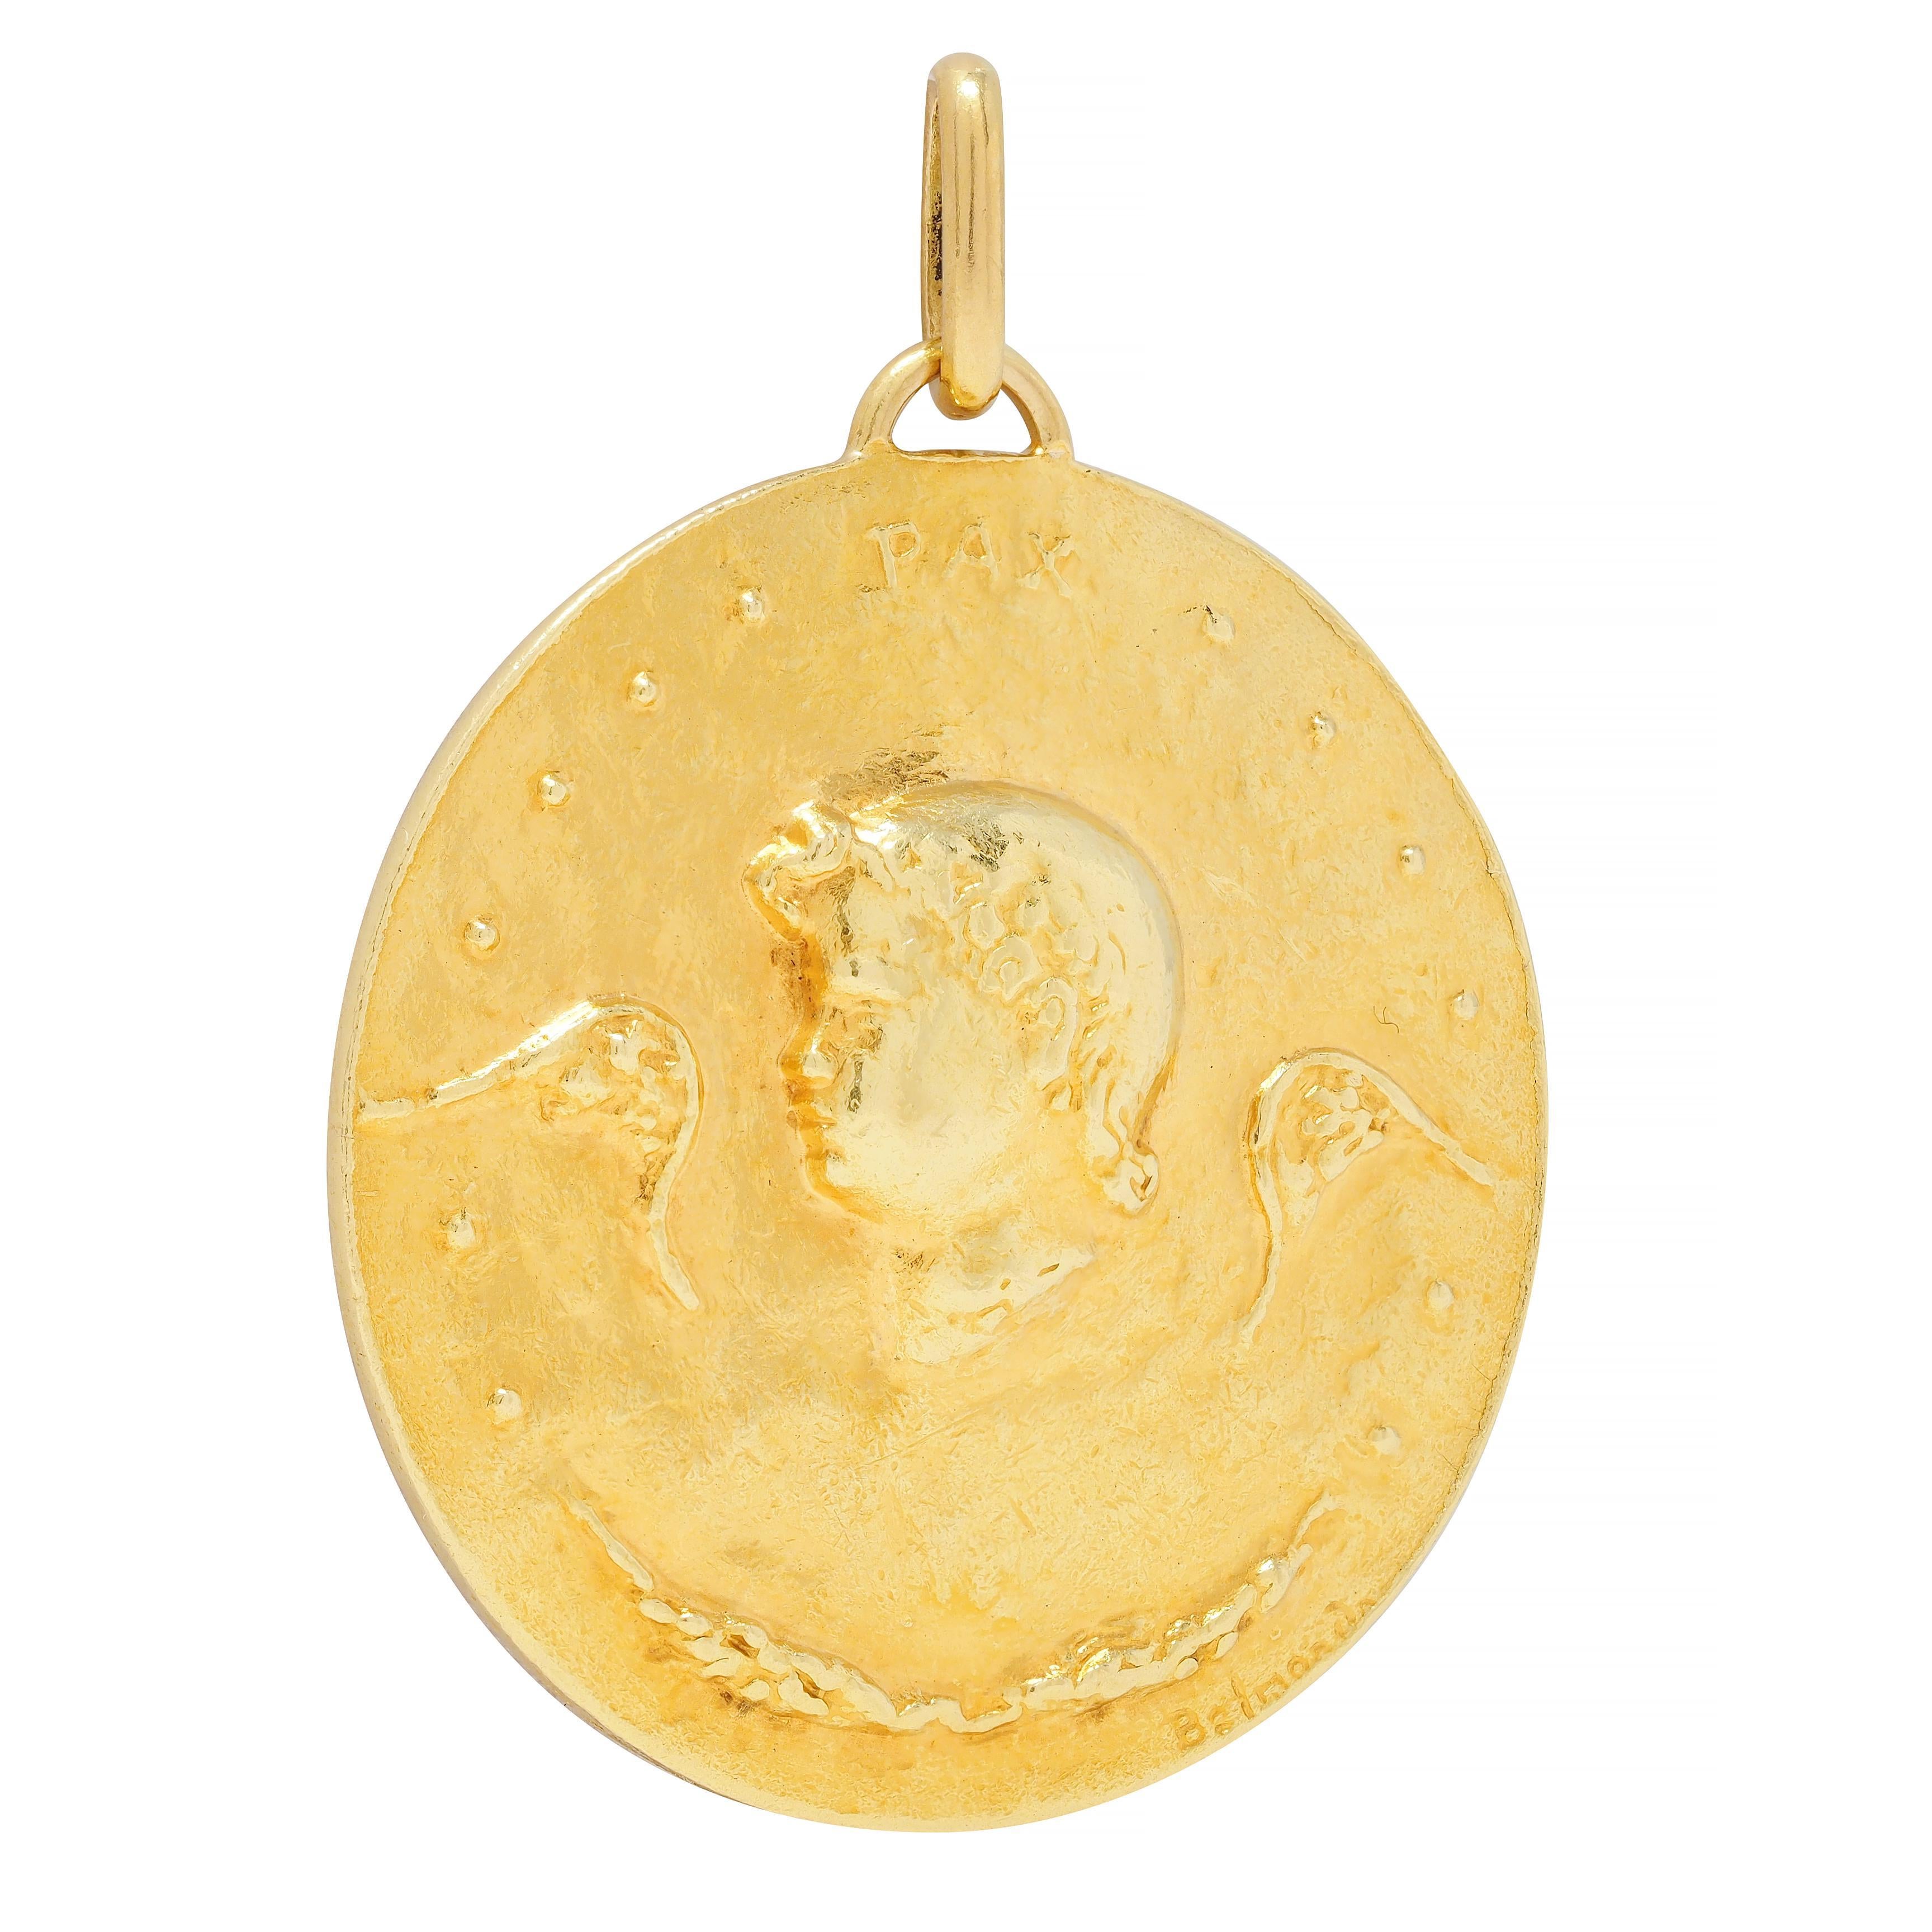 Designed as a round gold disk double-sided with raised cameos
One side depicts a cherub head flanked by wings with laurel
Inscribed 'PAX' translating from French as 